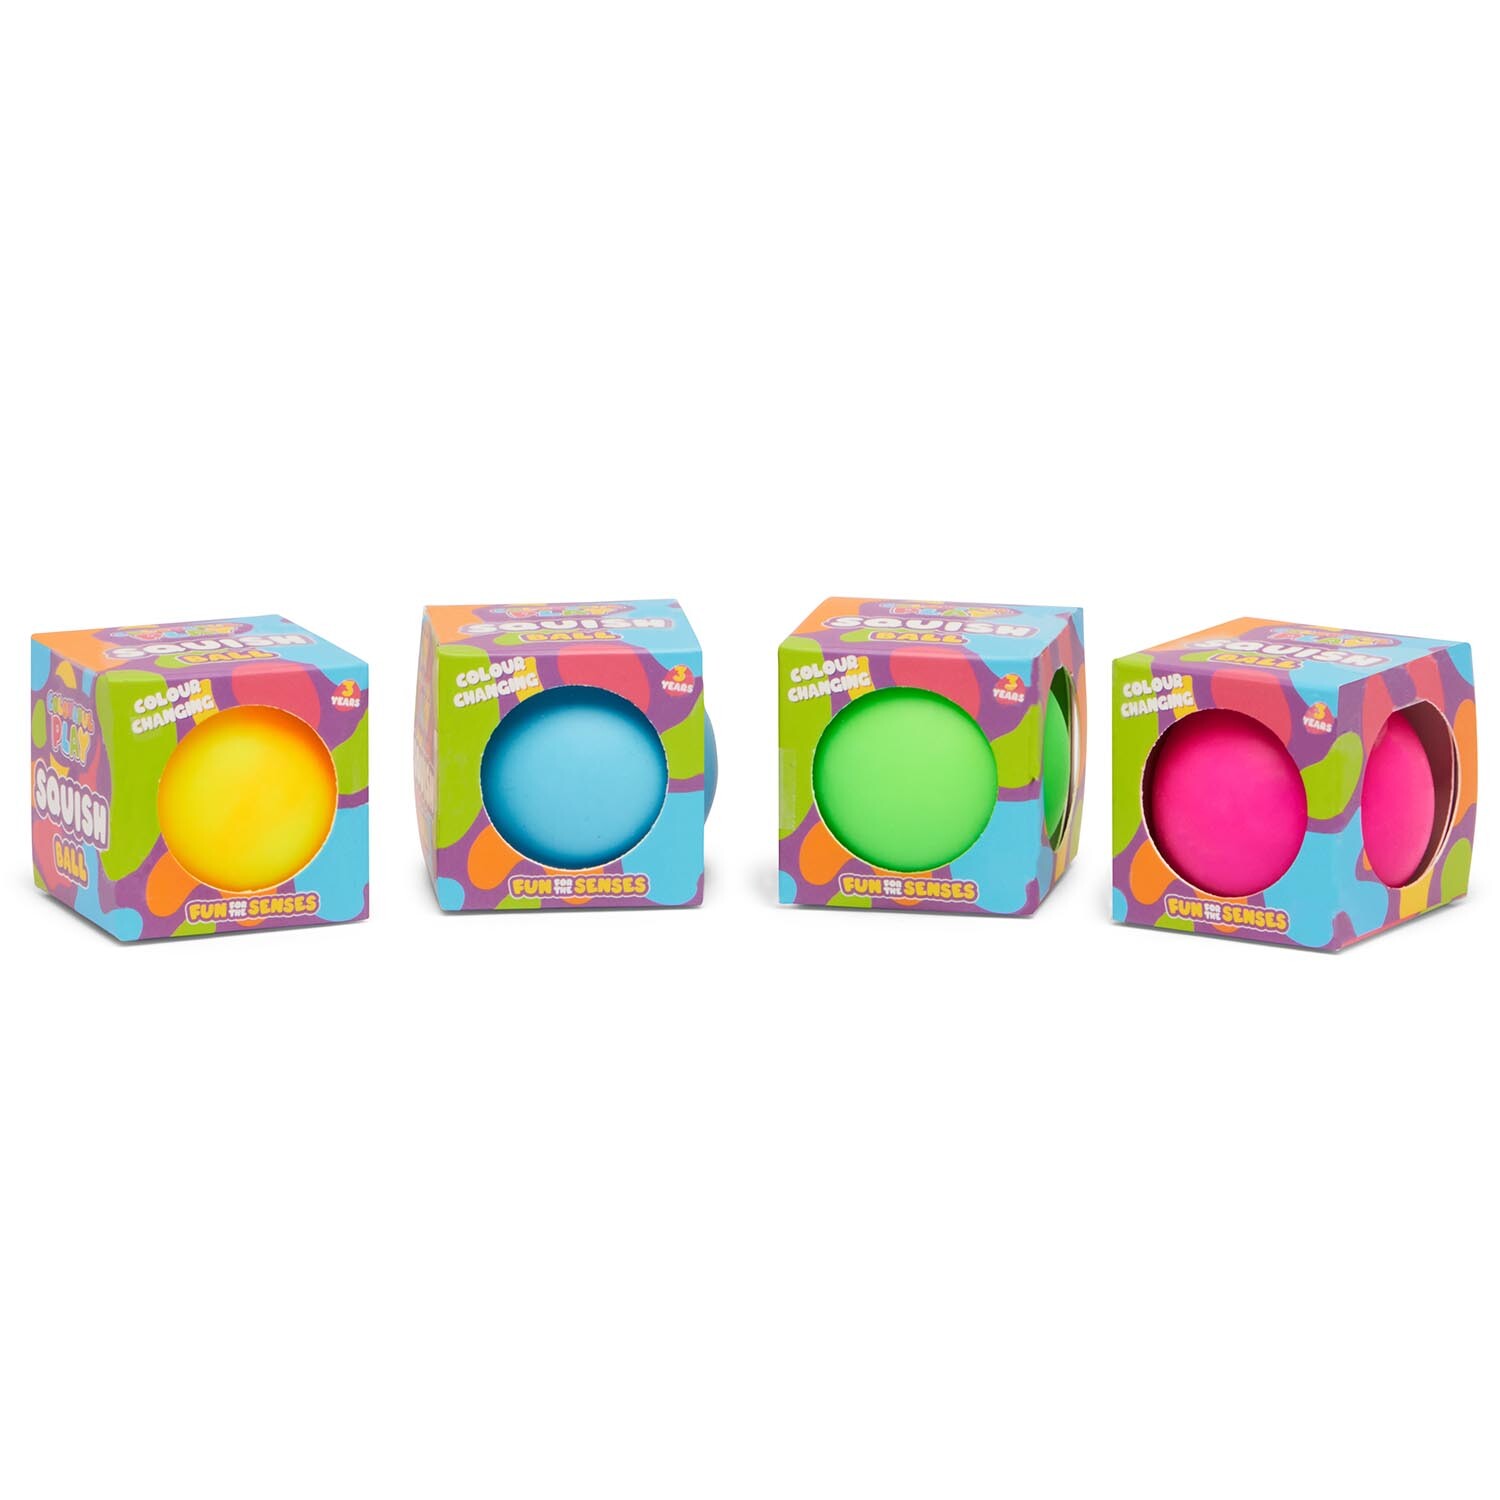 Single ToyMania Colour Changing Sensory Squish Ball in Assorted styles Image 1